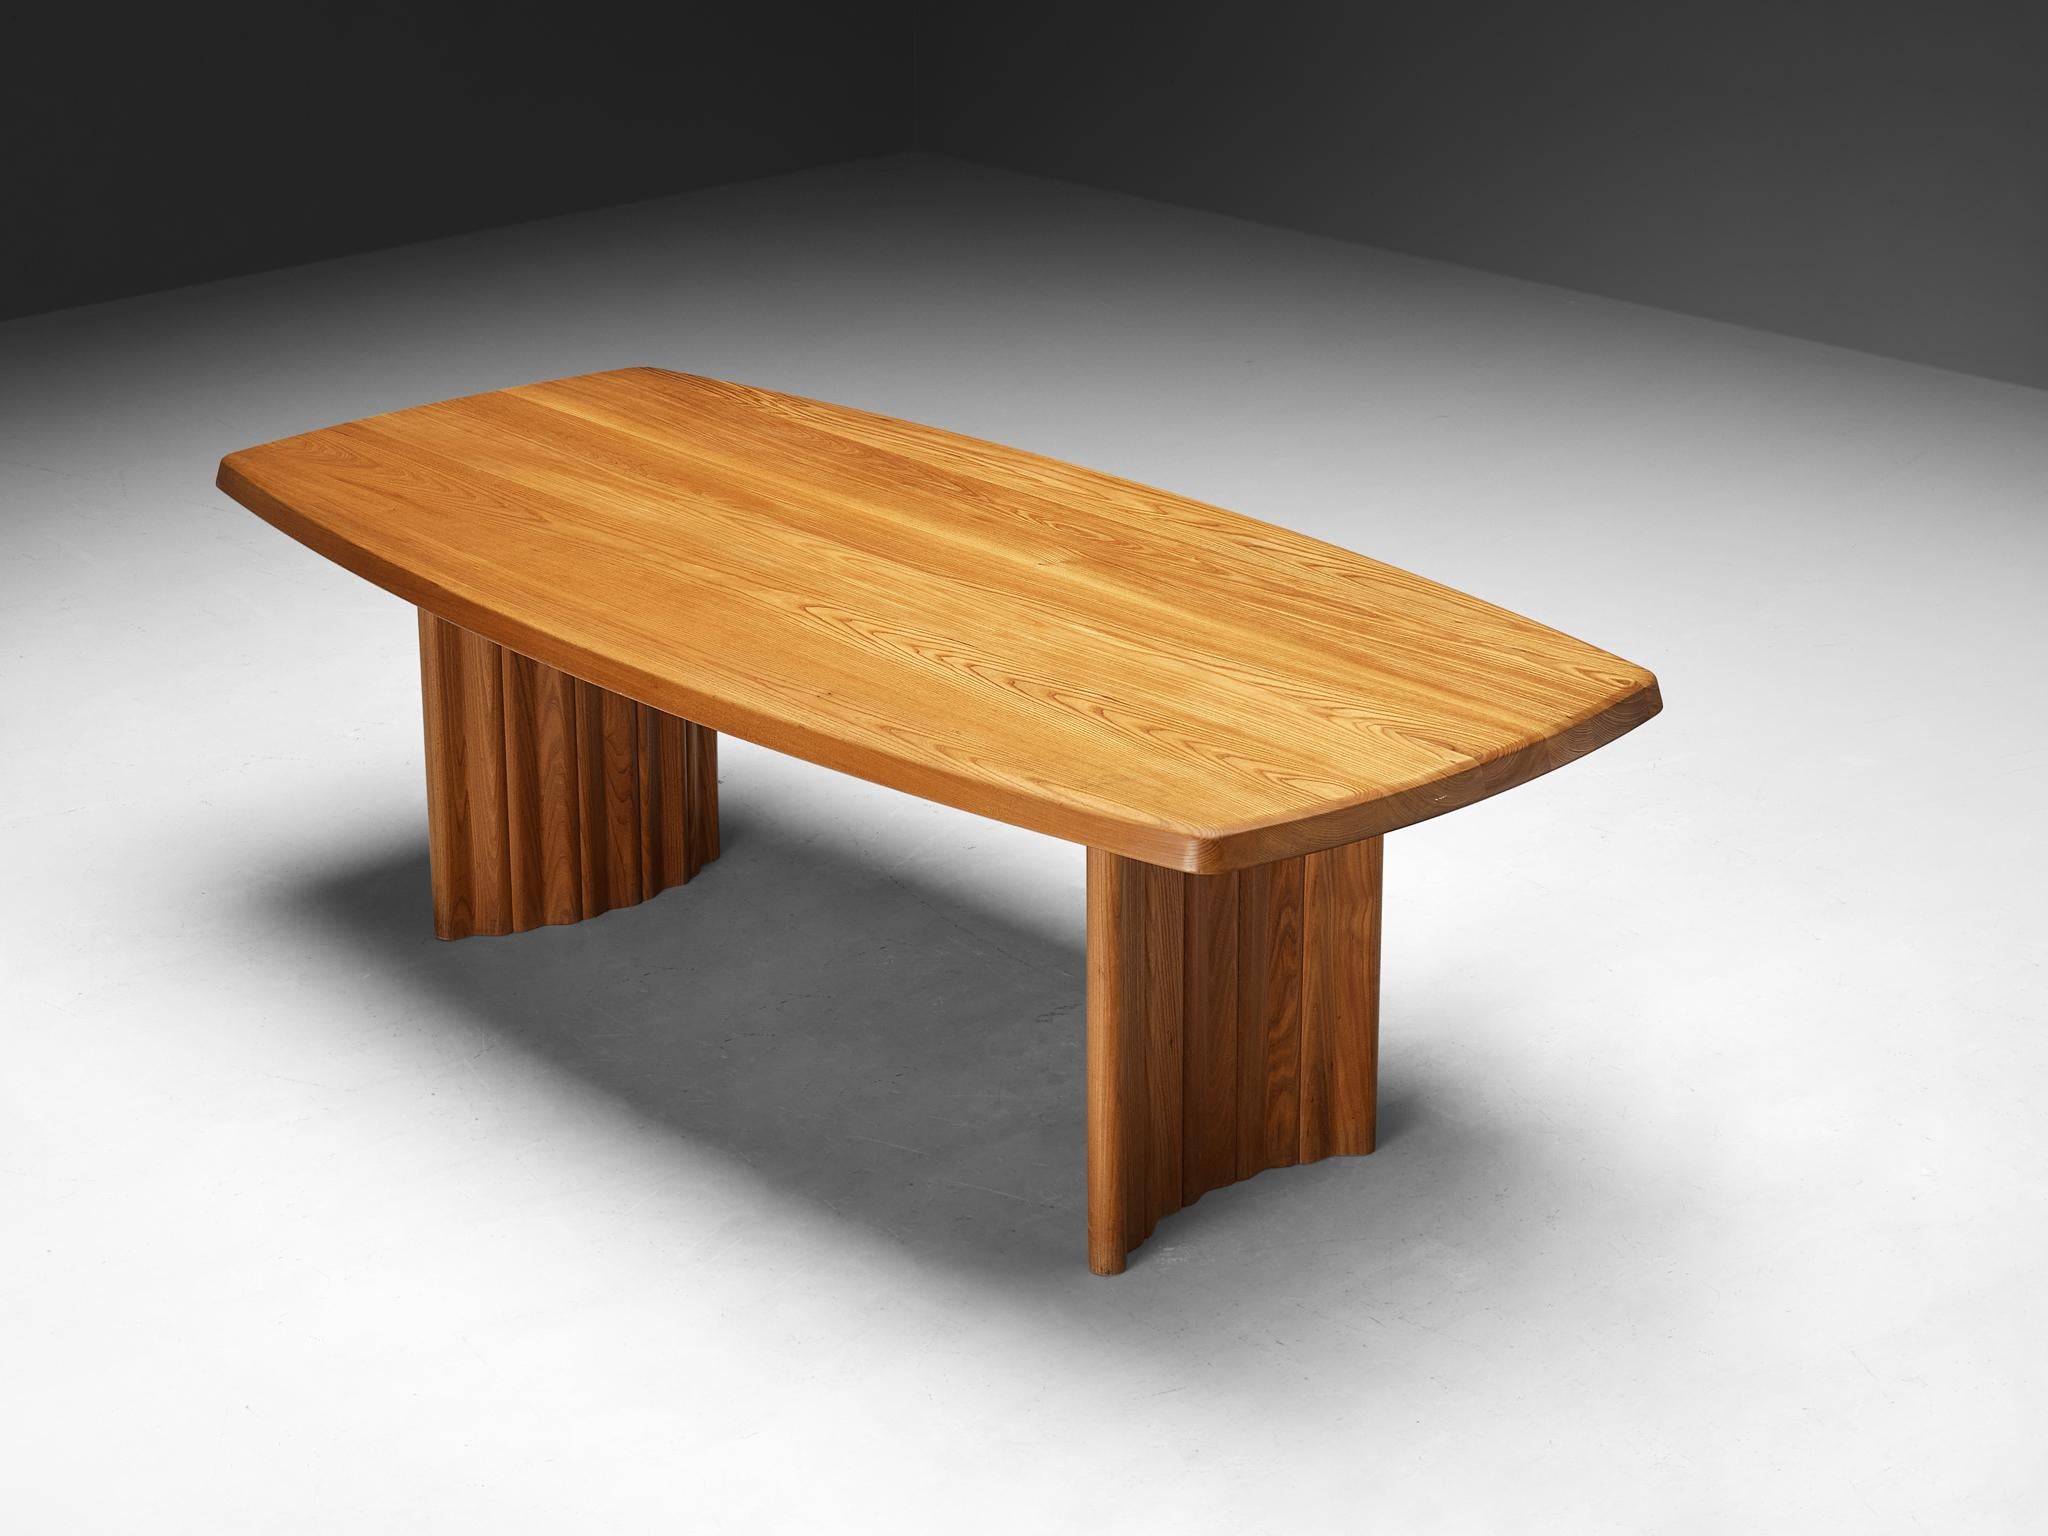 Ebénisterie Seltz, dining table, solid elm, France, 1980s

Situated in a small French region Alsace, Ebénisterie Seltz gained prominence as a workshop recognized for crafting, among others, Pierre Chapo's designs in the 1970s and 1980s.